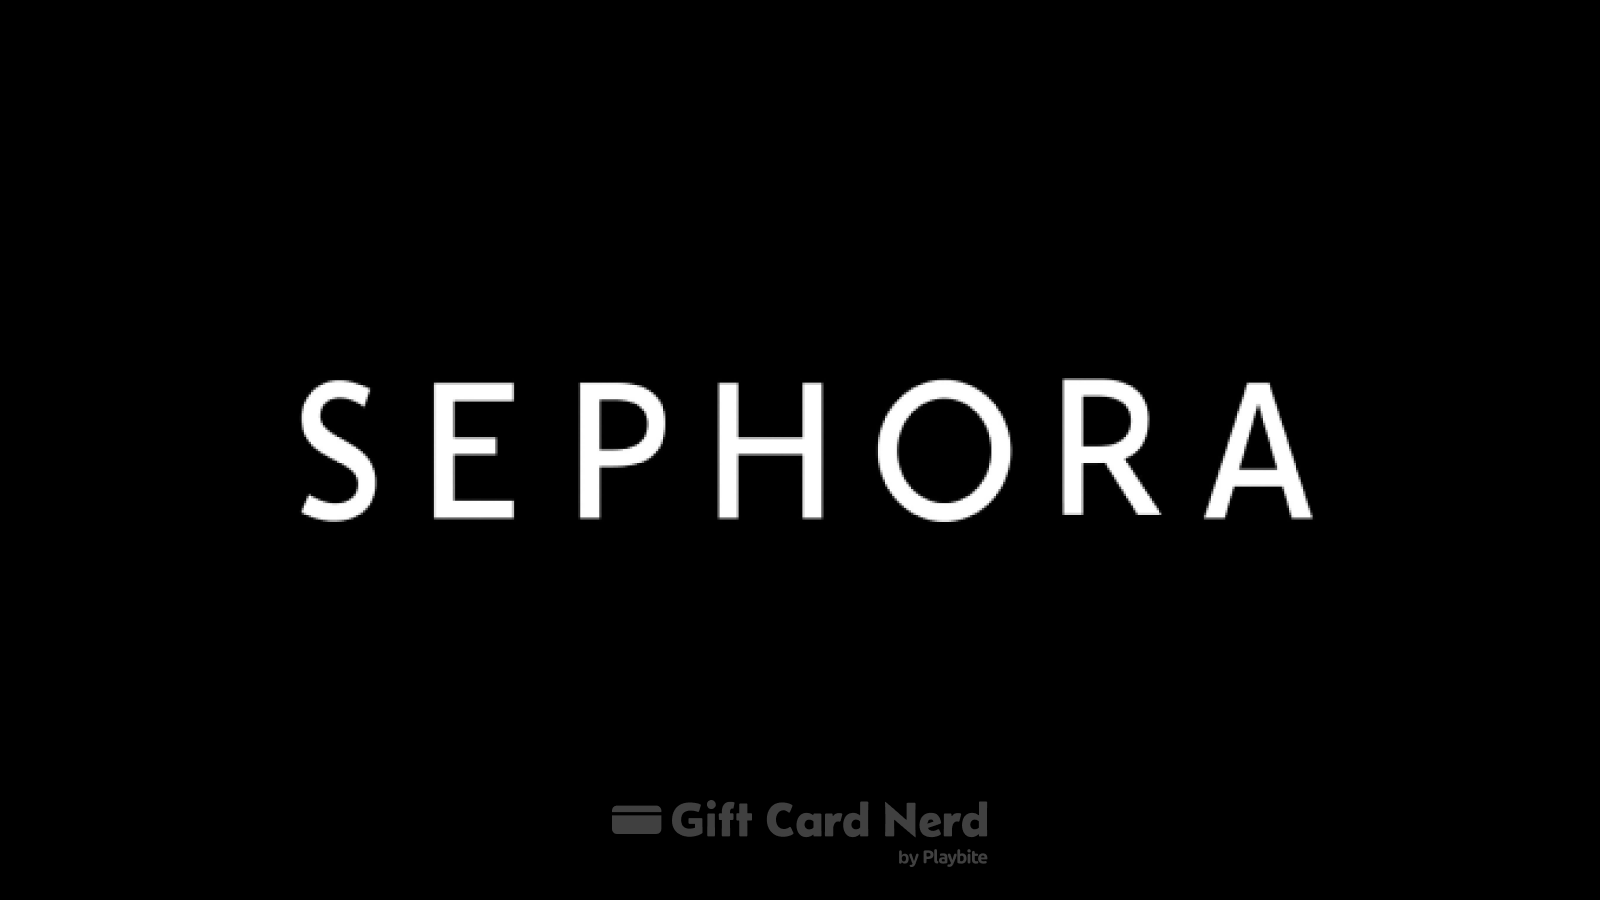 Can You Use a Sephora Gift Card on Cash App?